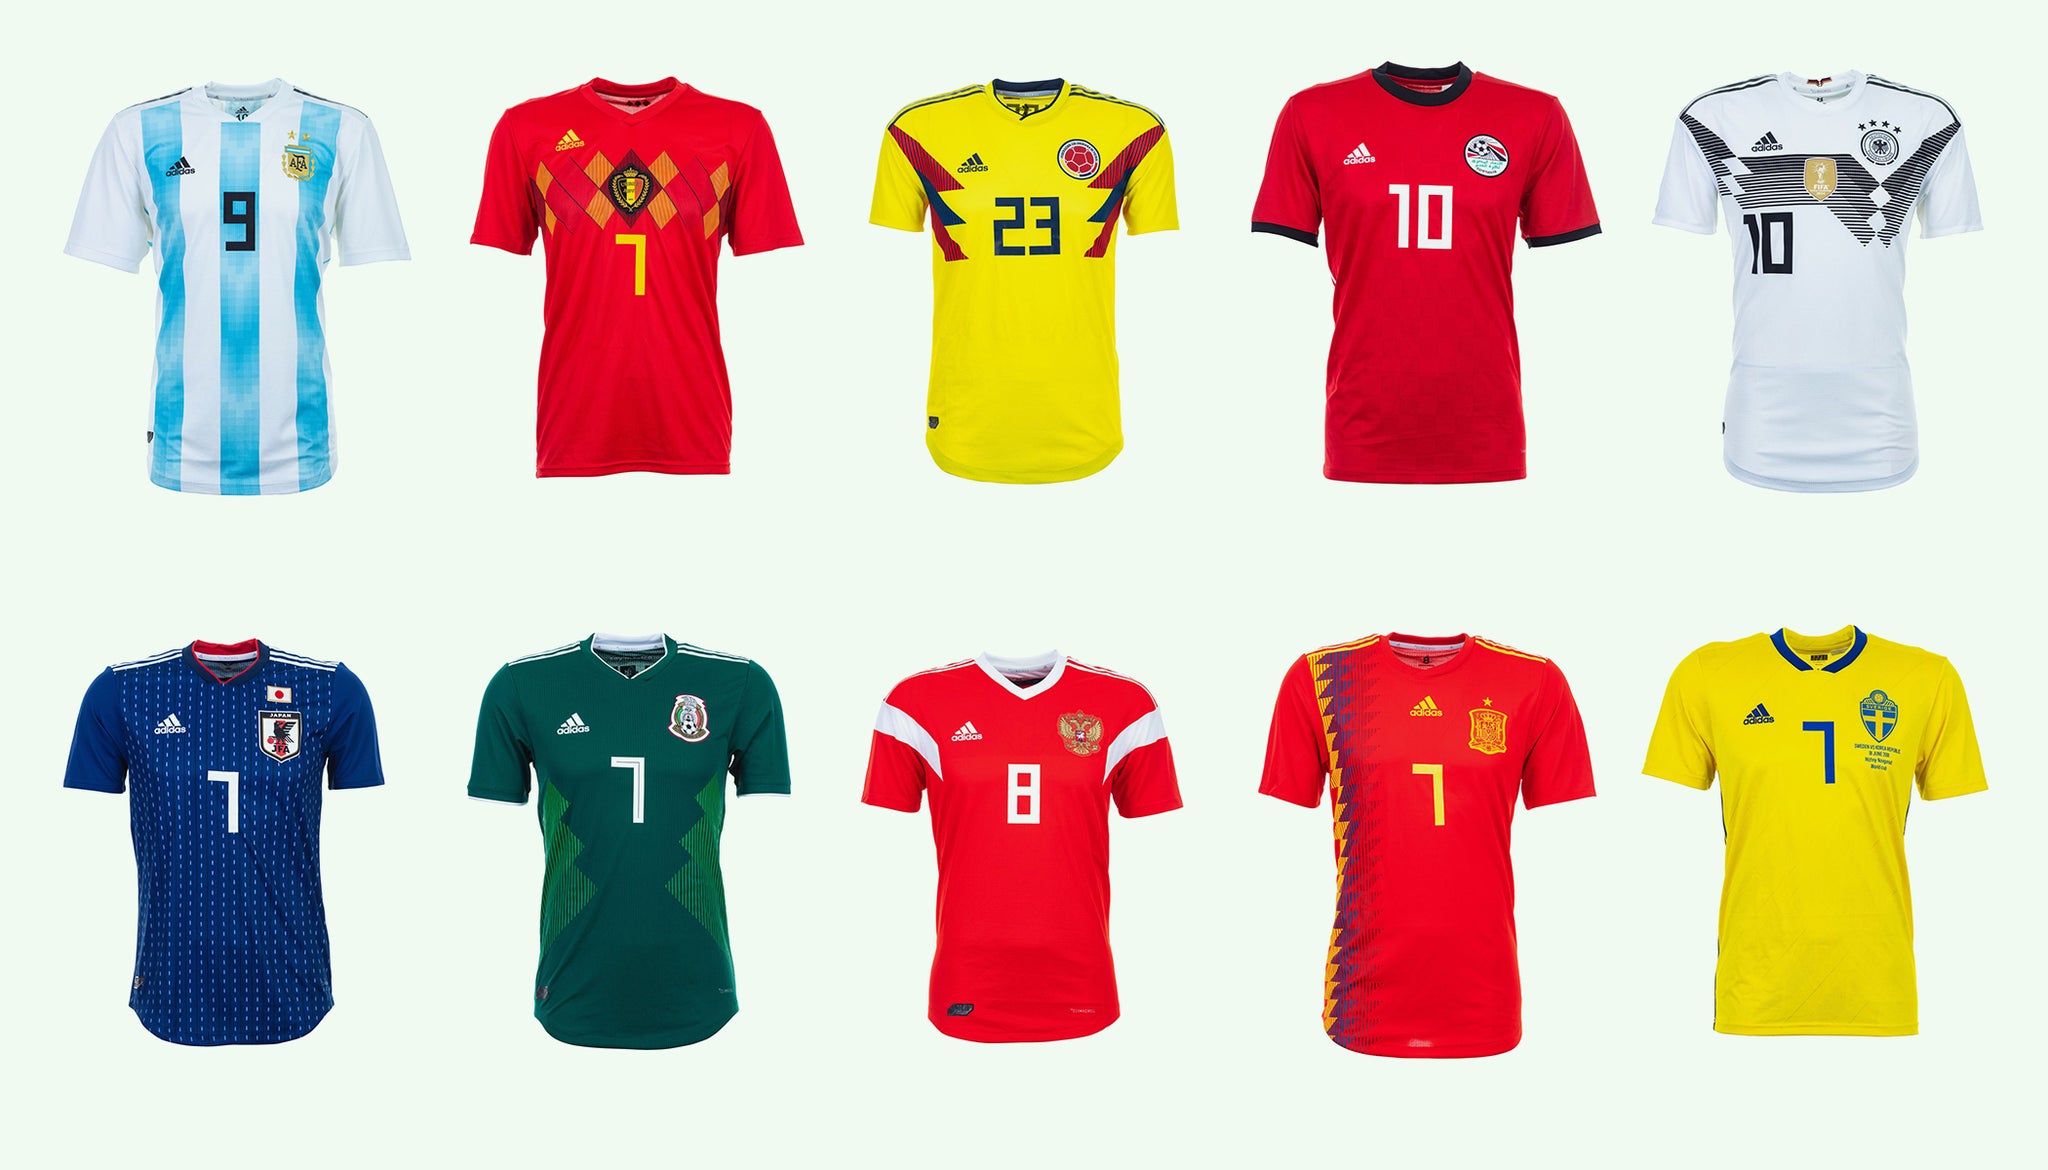 adidas world cup 2018 font download